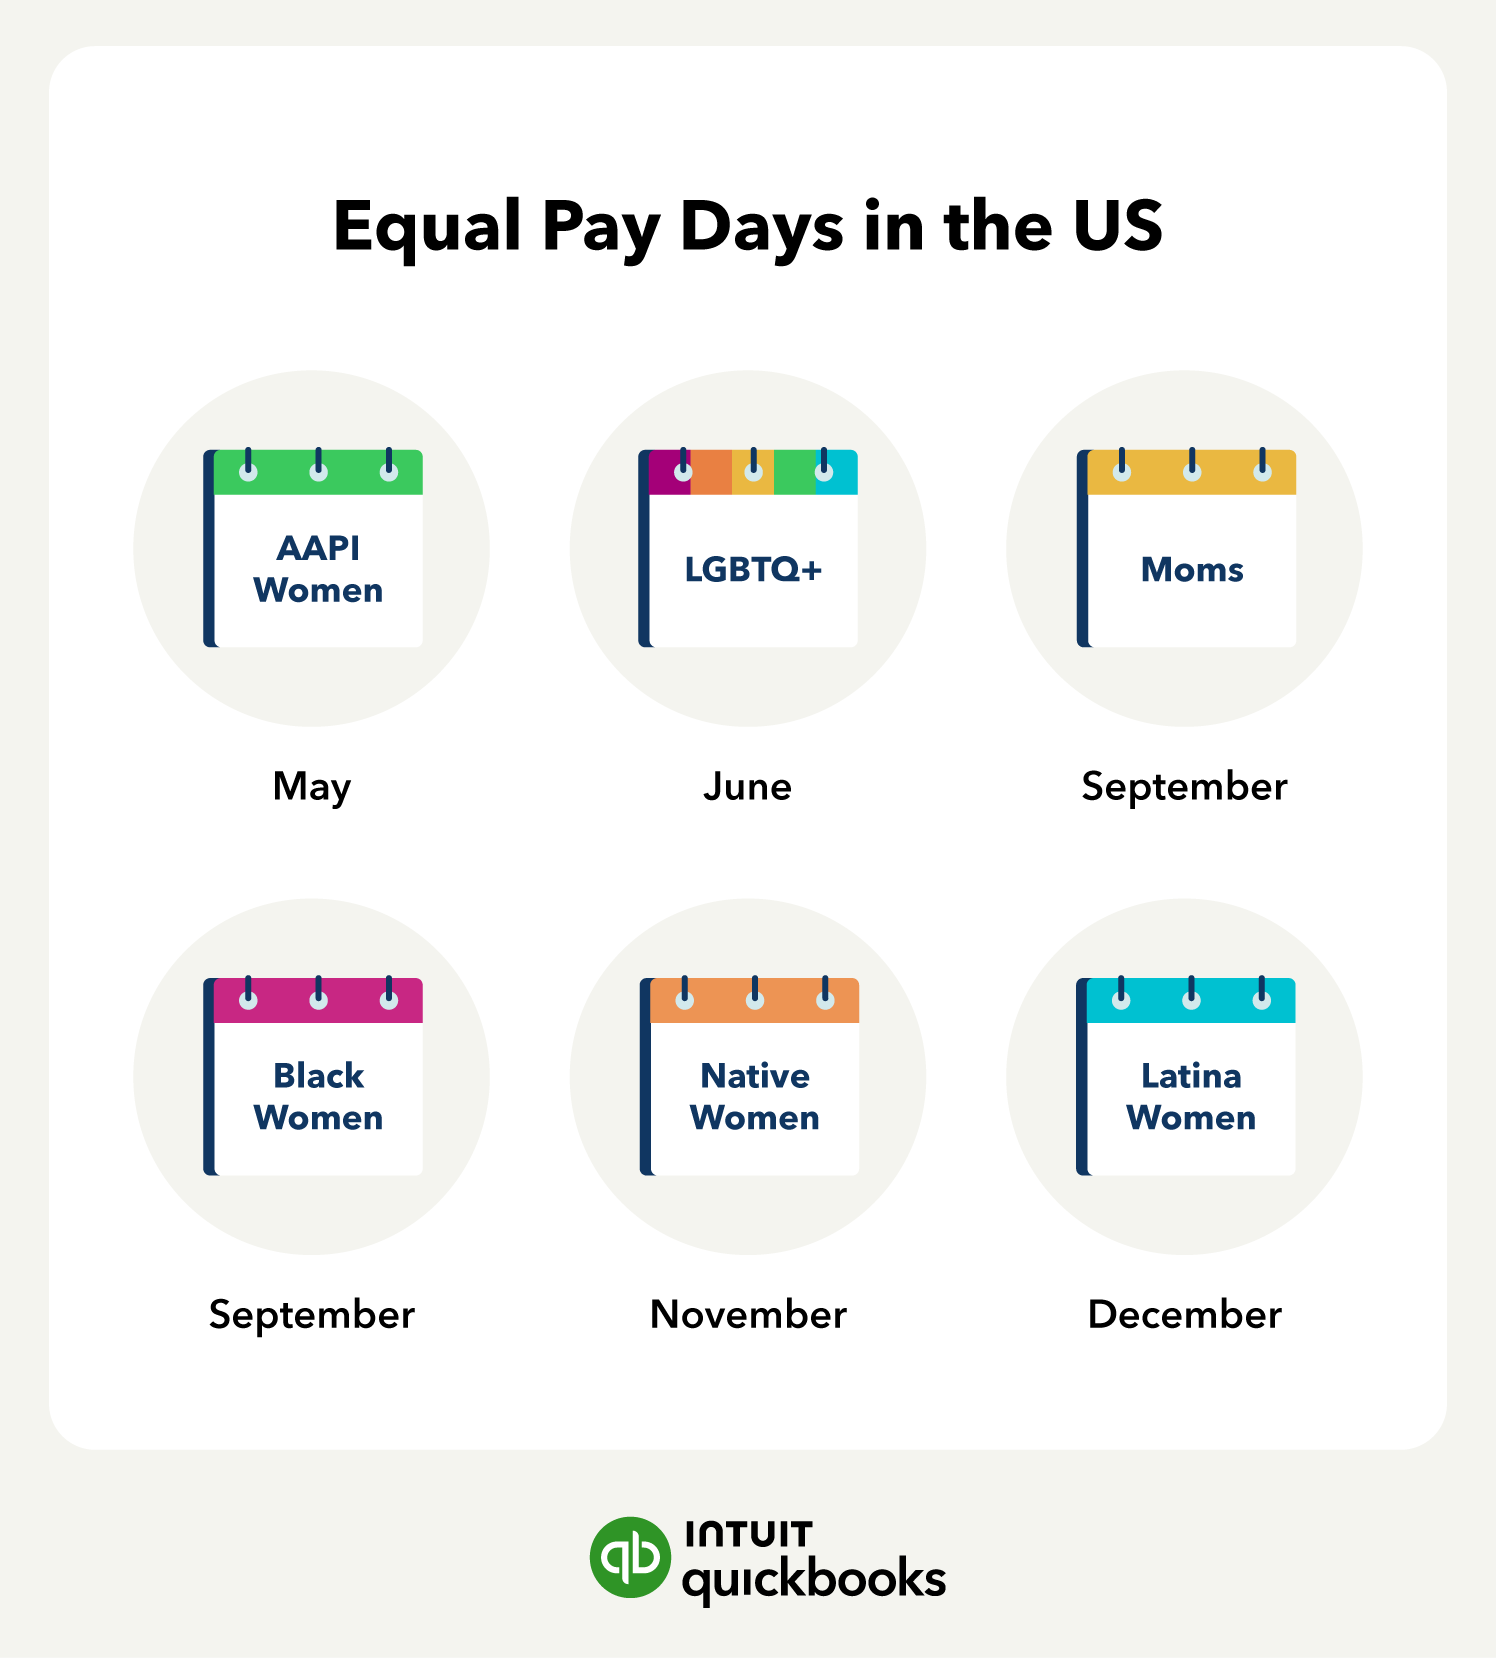 Equal Pay Days in the US